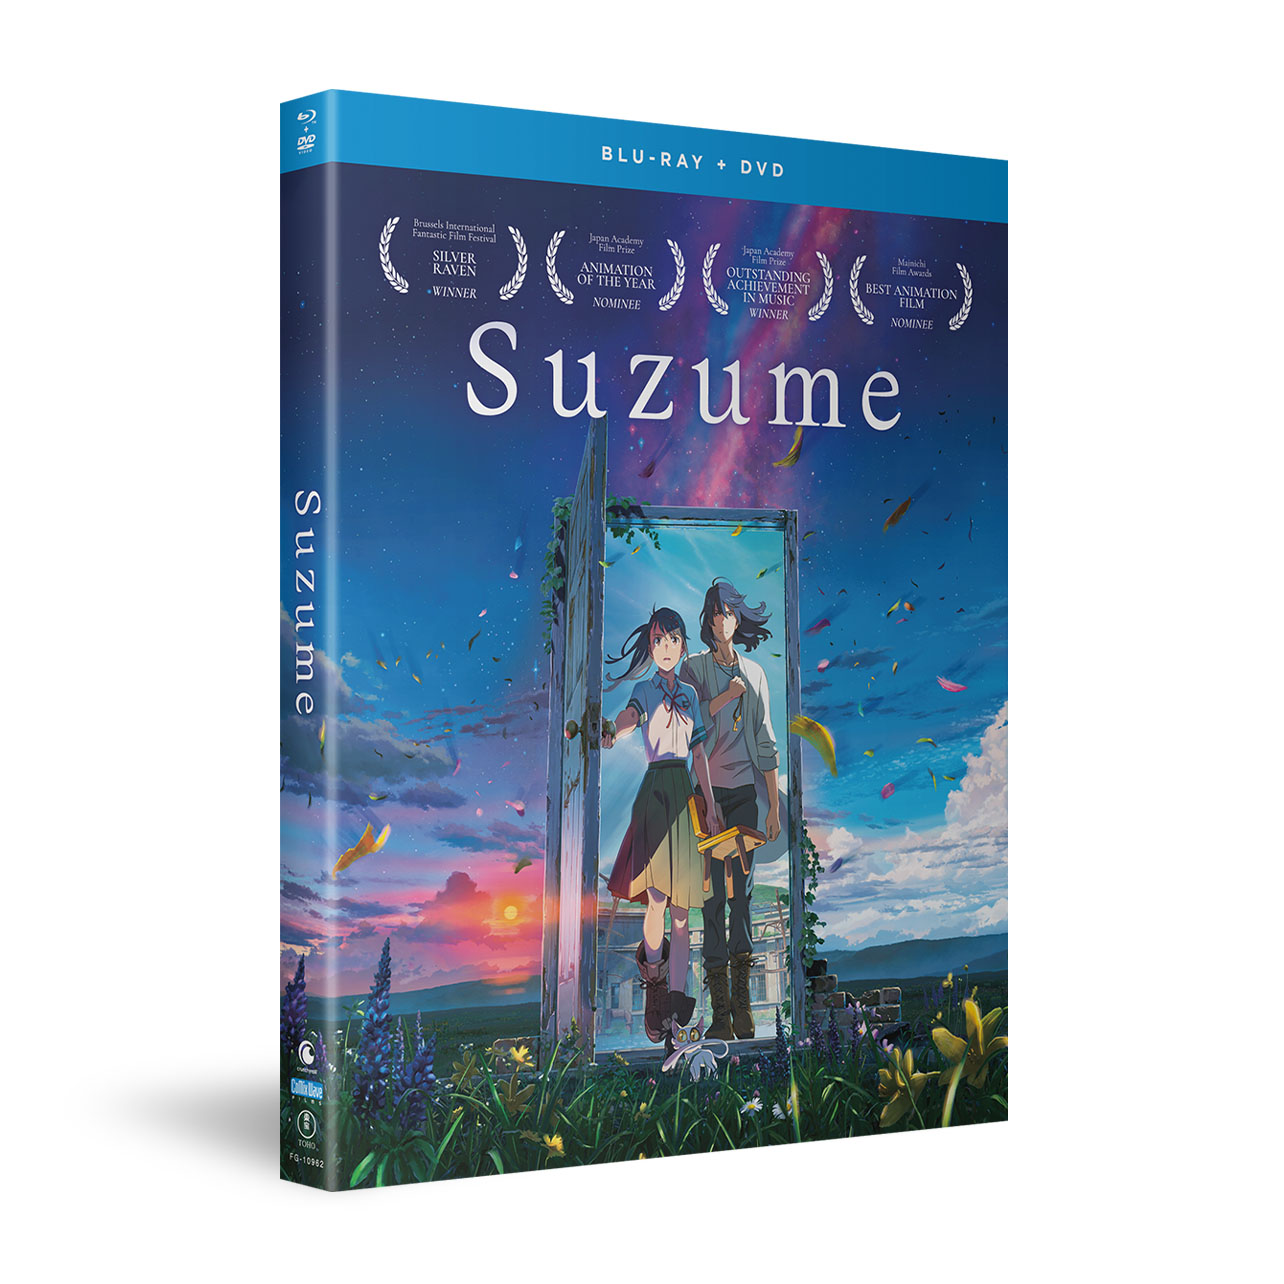 Suzume - Movie - Blu-ray + DVD - Limited Edition image count 4